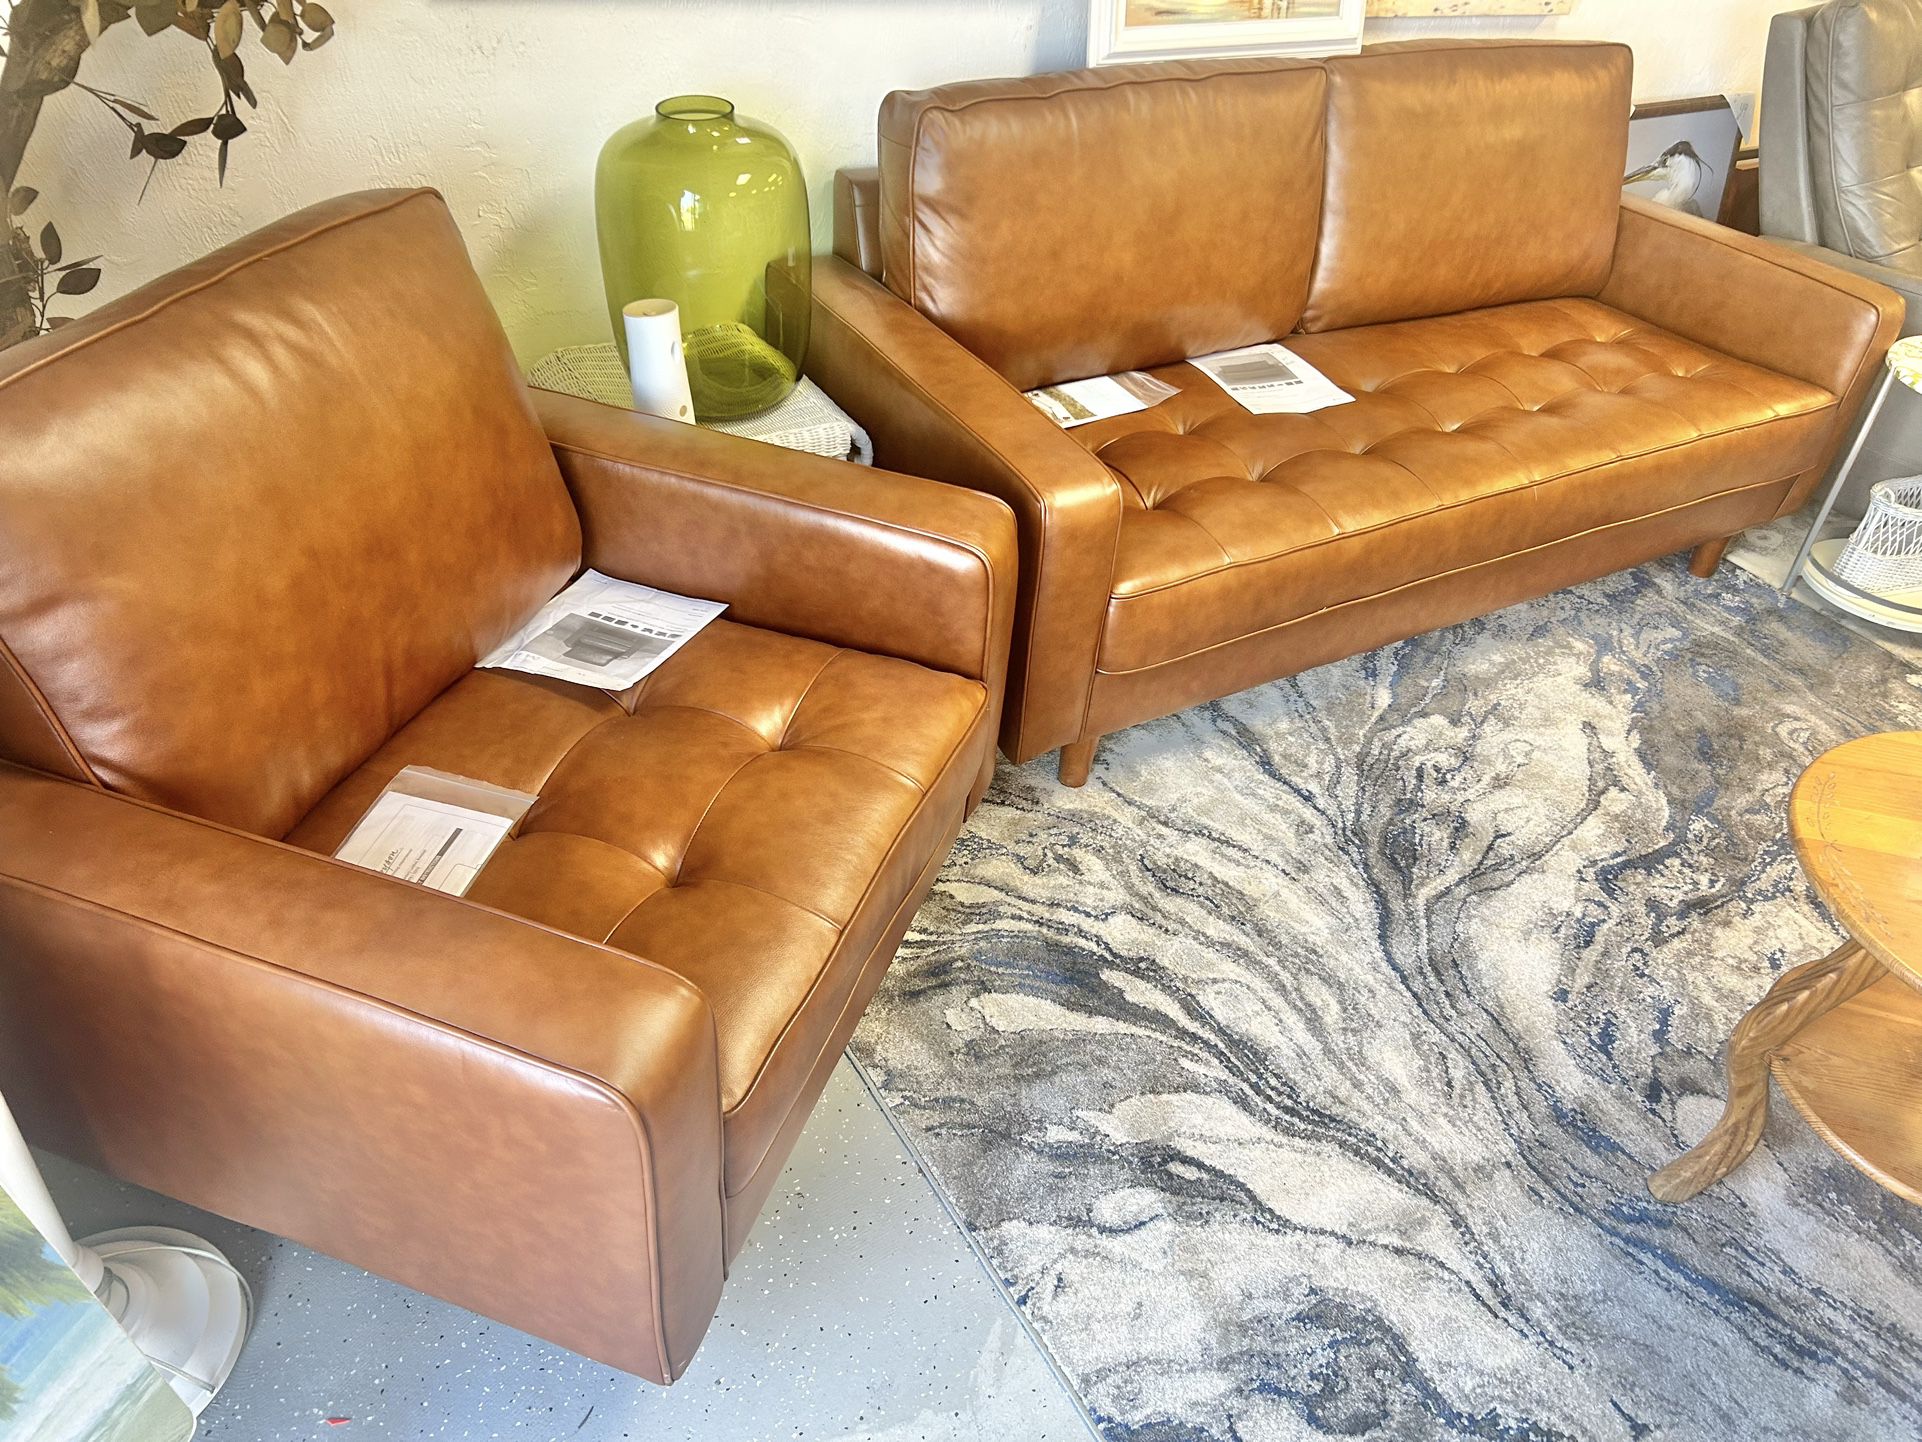 New Straight Out If Box Holloway Mid Century Couch And Oversized Chair 